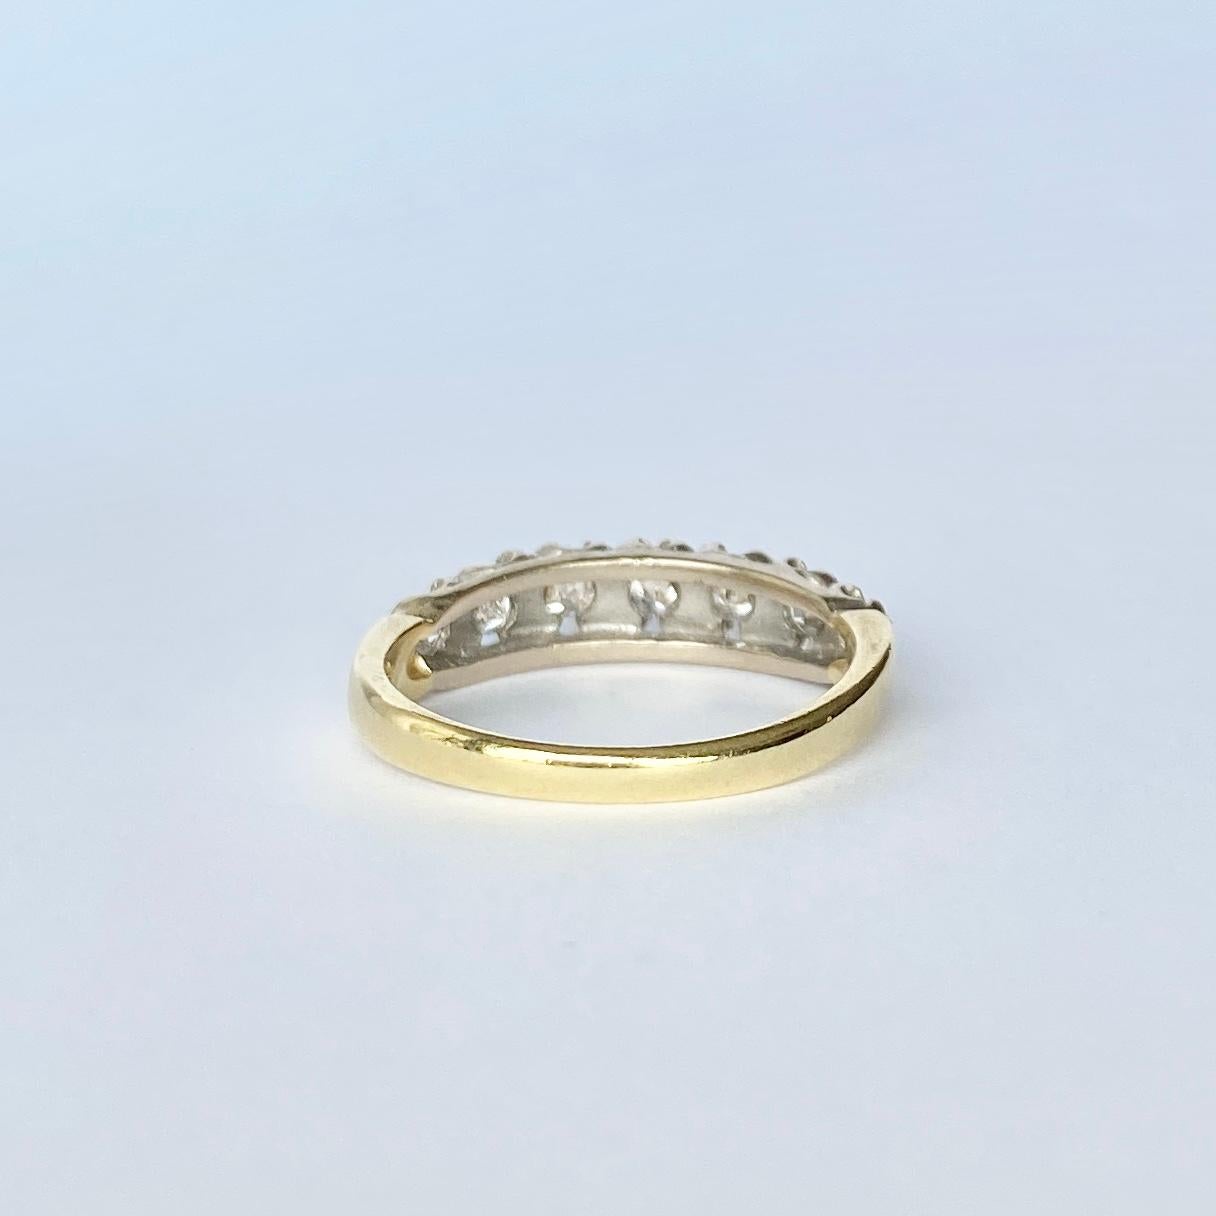 On top of this simple 18 Carat Gold band sits seven bright diamonds with a total weight of 70pts. The diamonds have platinum detail around them and the ring has a chunky feel. 

Size: M or 6 1/4 
Band Width: 5mm

Weight: 4g